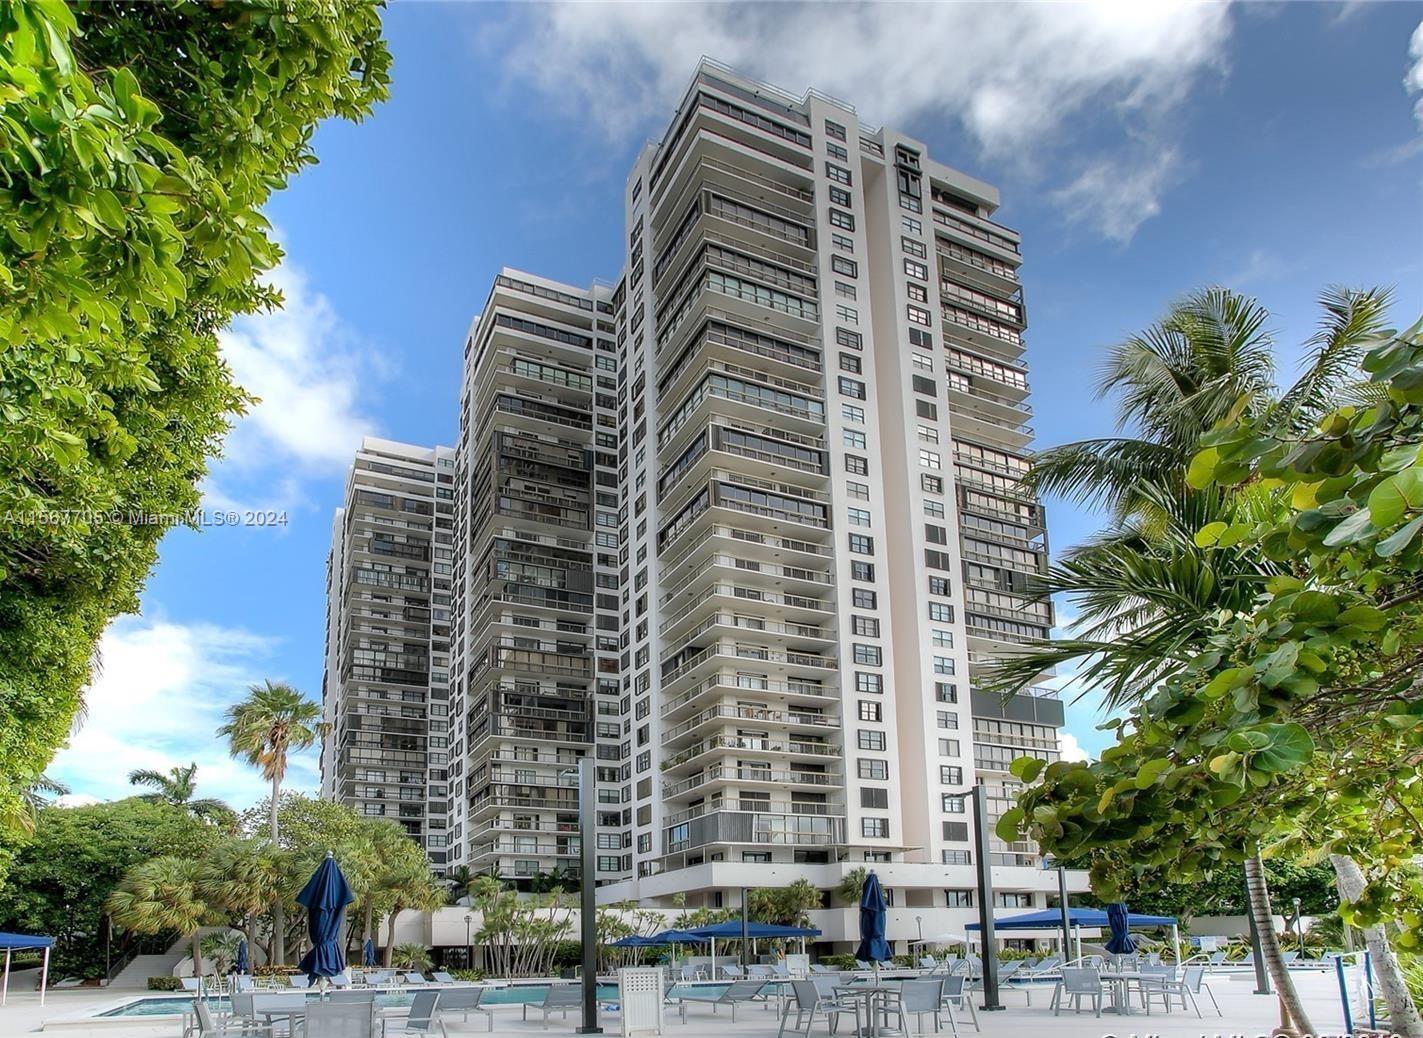 STUNNING VIEW TO KEY BISCAYNE, FURNISHED UNIT, ENCLOSED BALCONY, IMPACT WINDOWS THROUGHOUT APT., ELECTRIC SHADES, MARBLE FLOORS, OFF WHITE IN LIVING & DINING ROOM,WOOD IN BOTH BEDROOMS. WASHER & DRYER INSIDE THE UNIT. LARGE WALK IN CLOSETS, SECURITY 24/7, IN LOBBY & GATE,ONE ASSIGNED COVERED PARKING SPACE. HEATED LAP POOL, 5 TENNIS COURTS, BEAUTY SALON, VALET 24/7